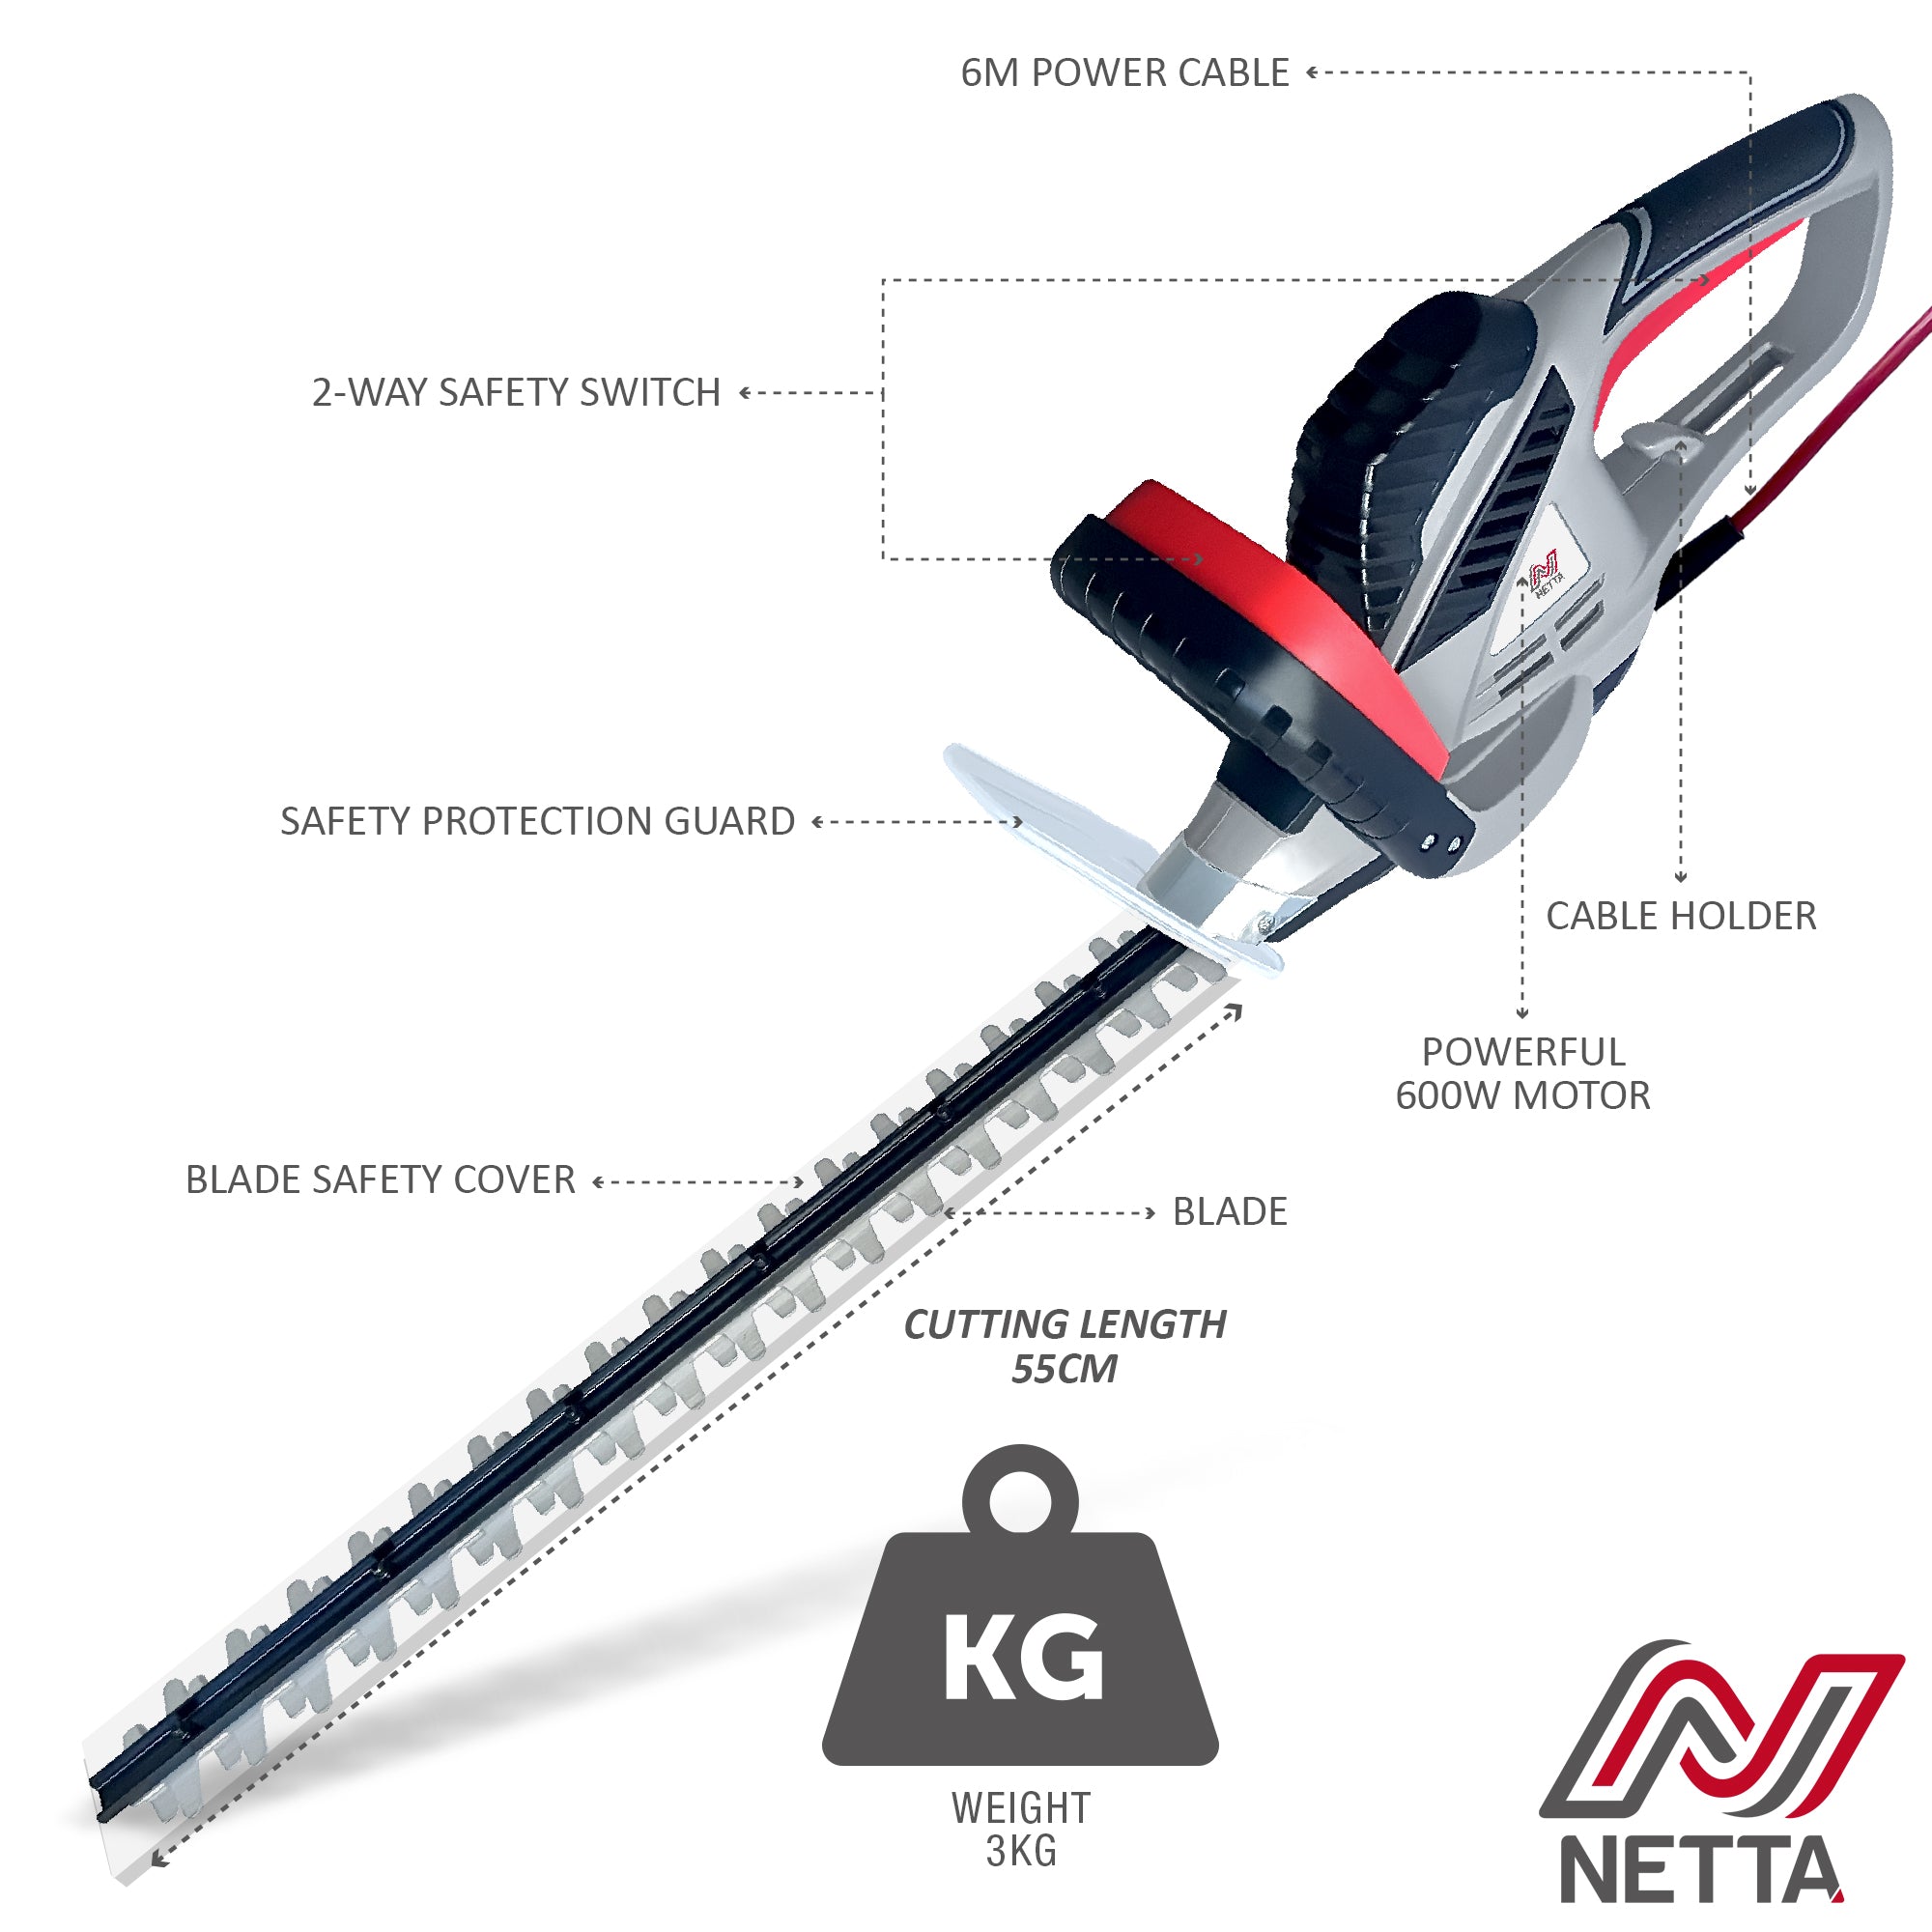 NETTA 600W Corded Hedge Trimmer and Cutter 55cm Diamond Cutting Blade